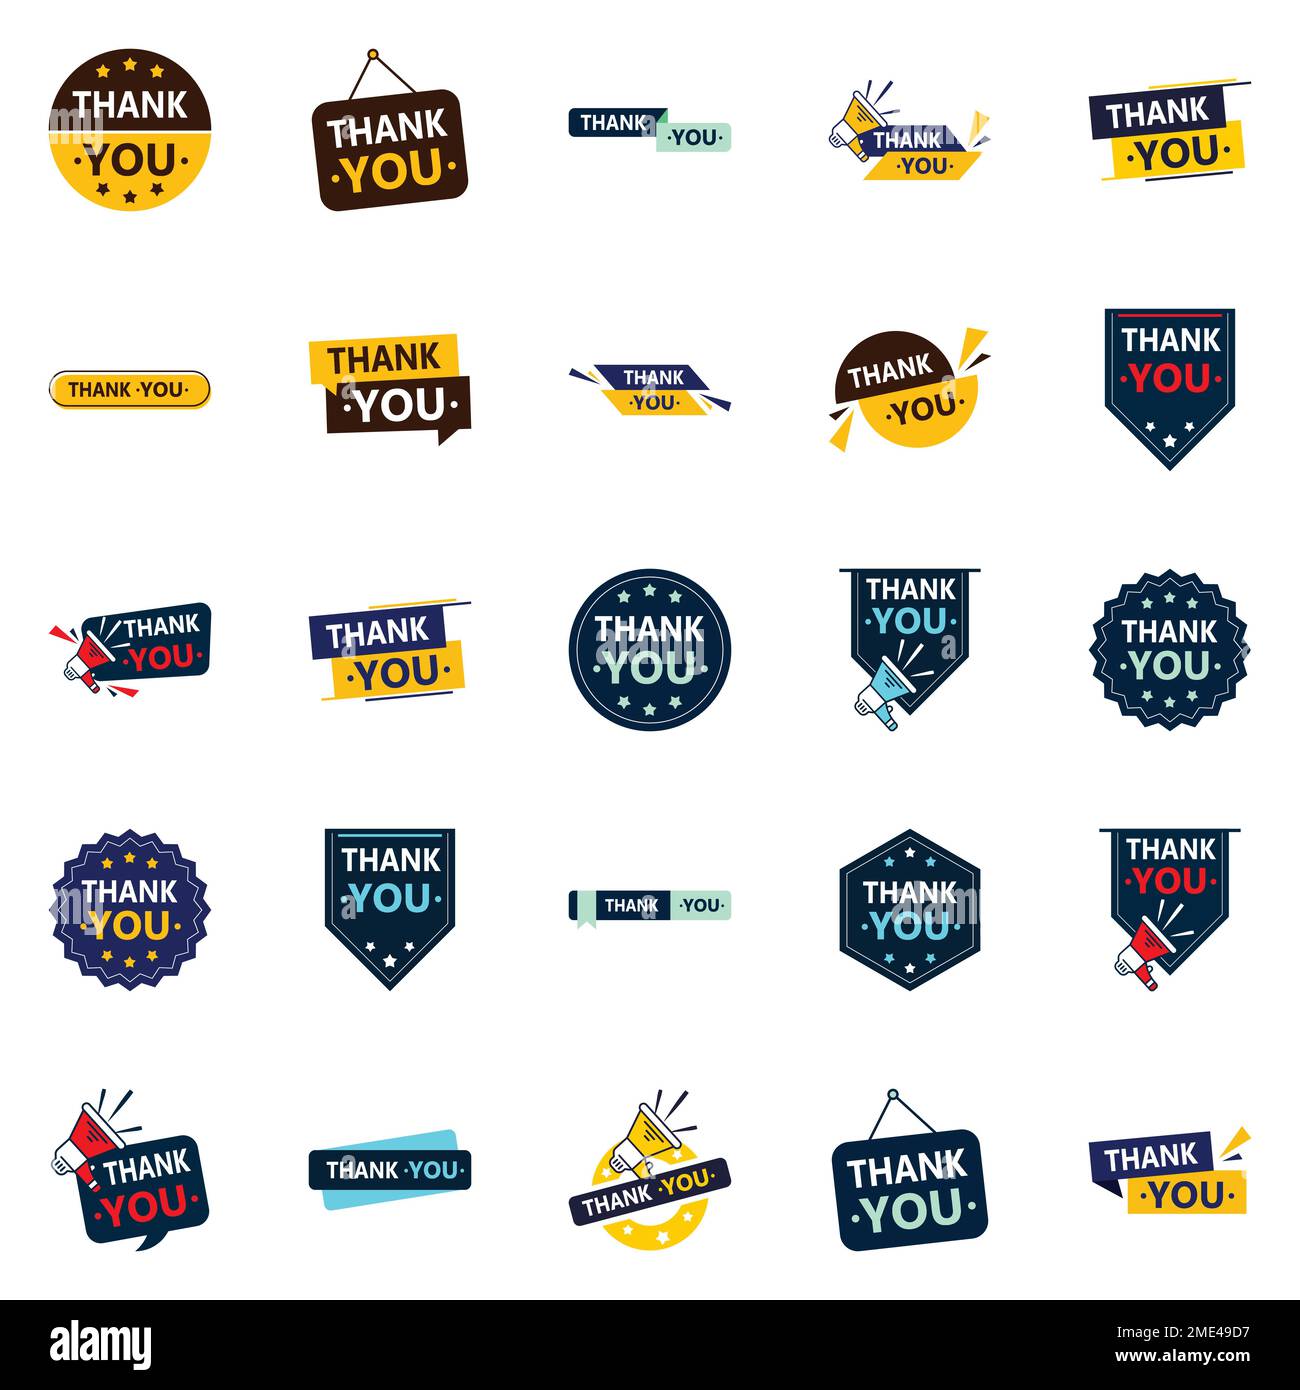 25 Thank You Vector Icons to Show Your Appreciation Stock Vector Image ...